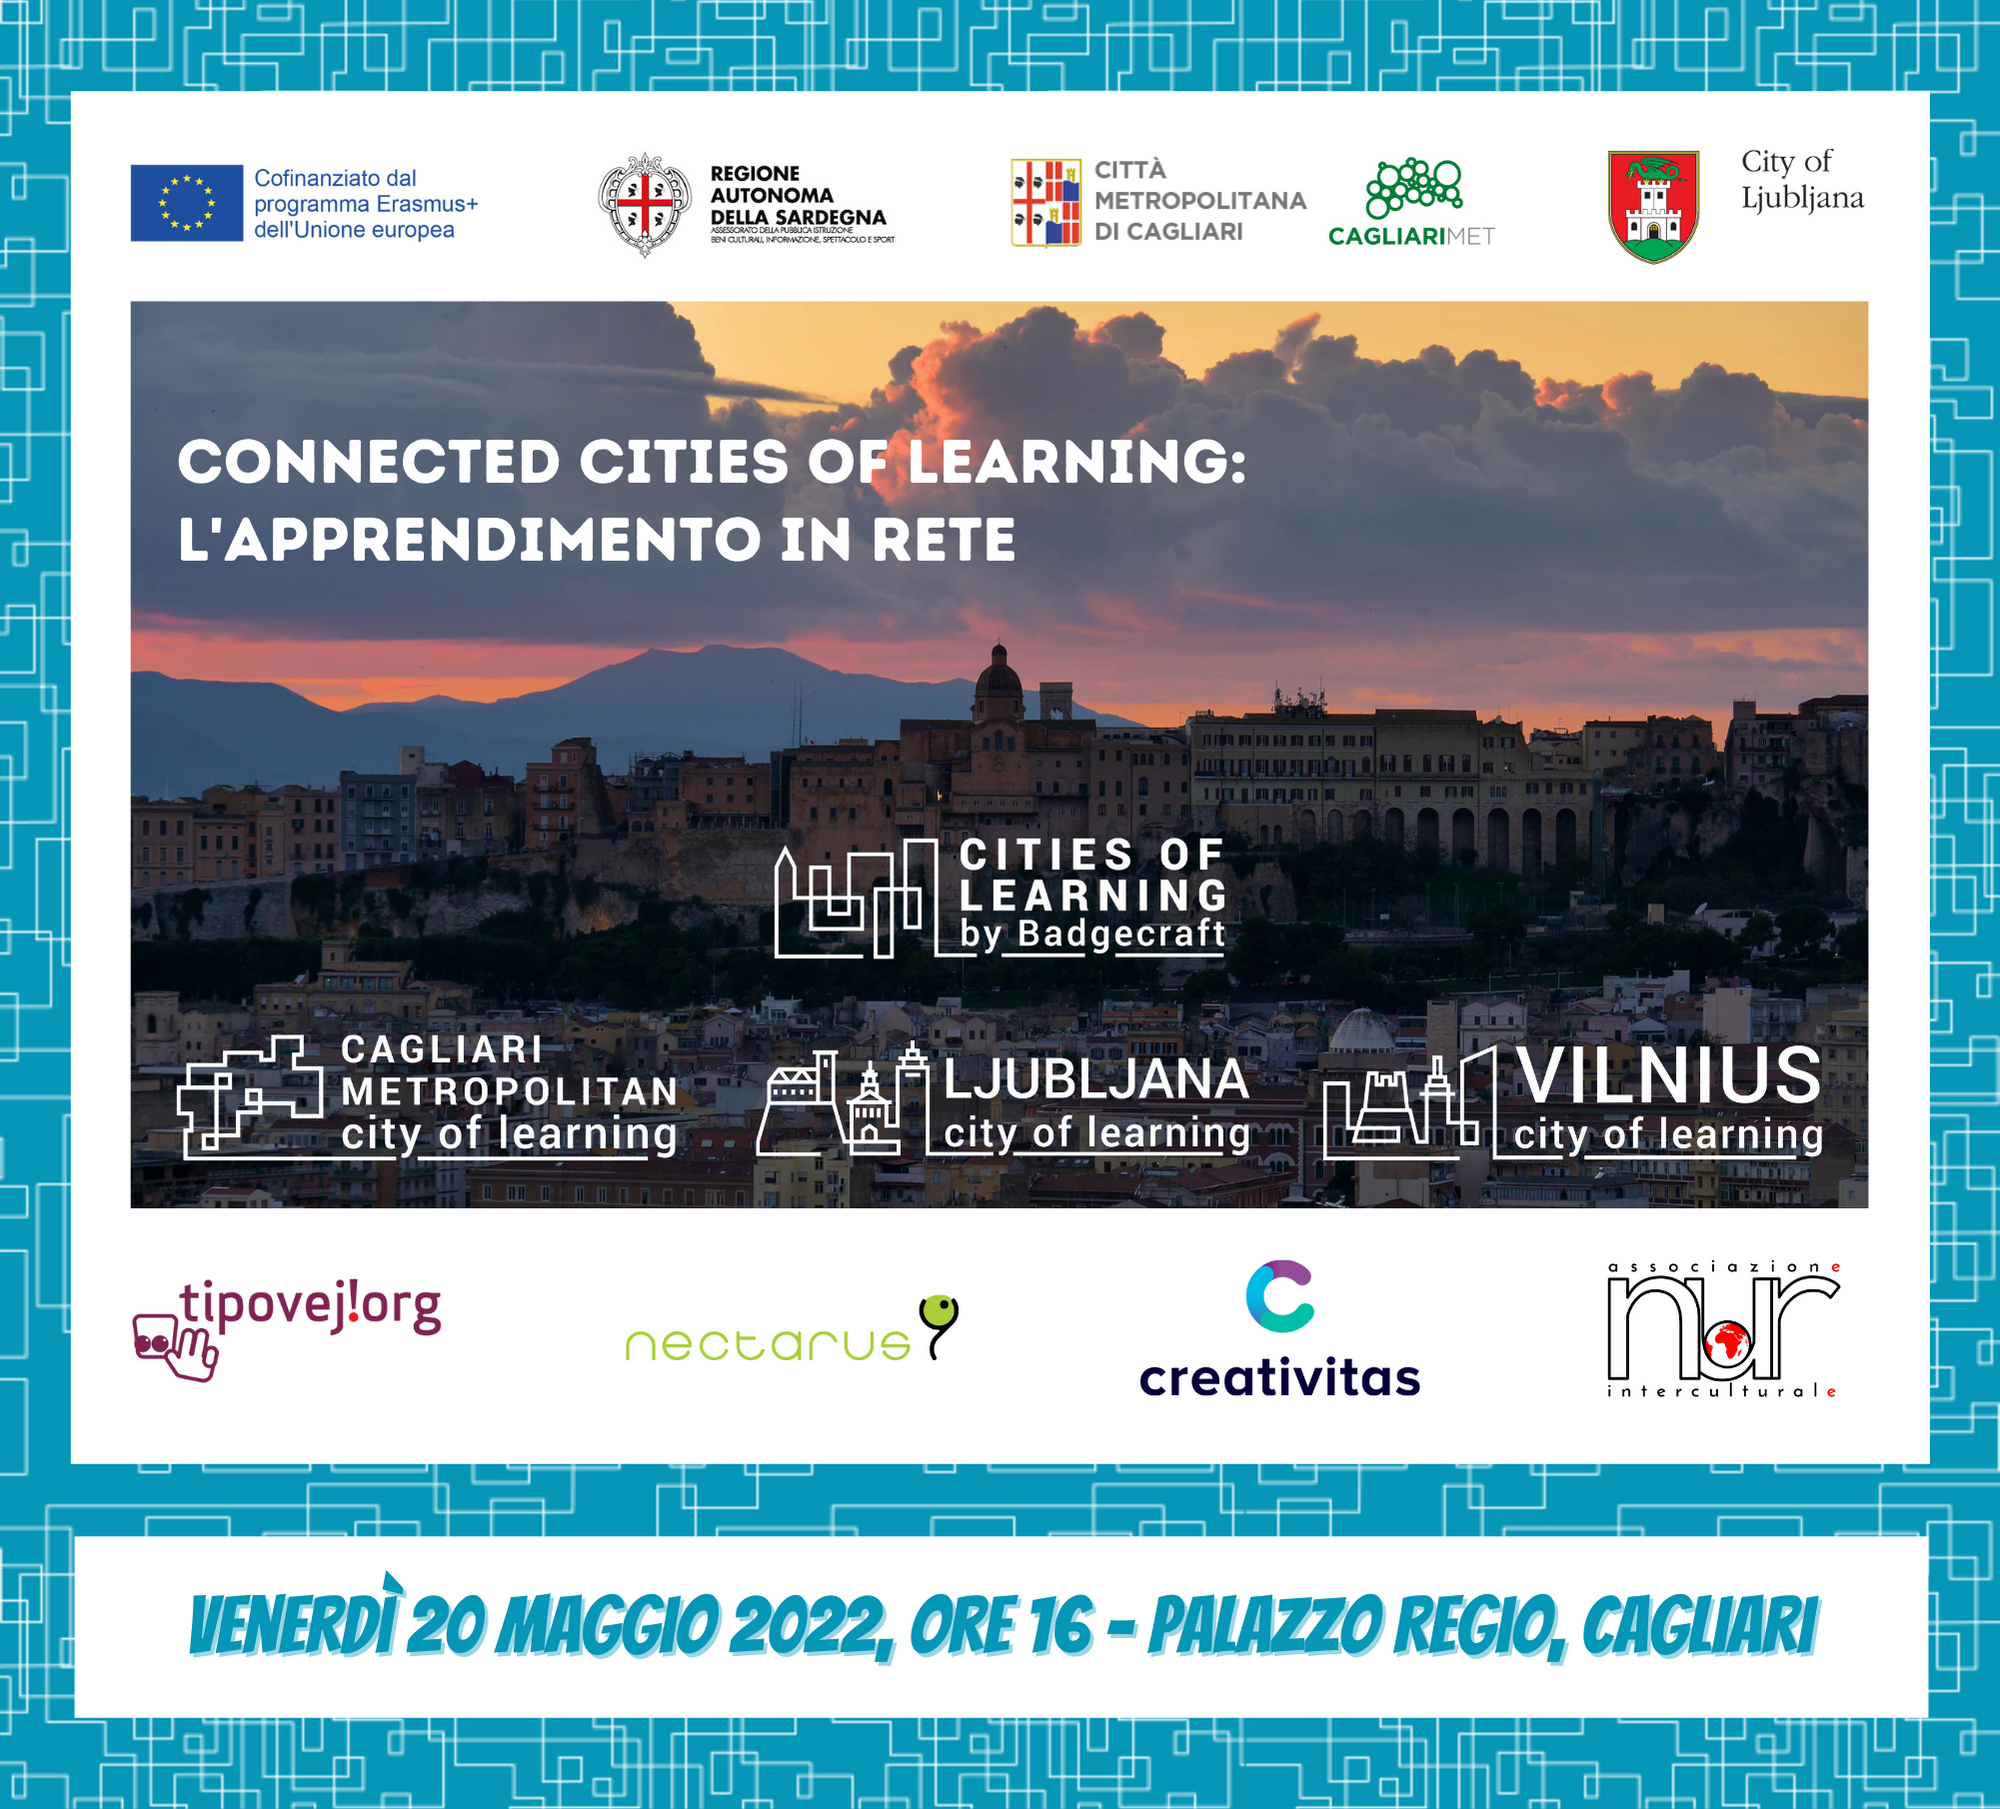 Connected Cities of Learning: L'apprendimento in rete